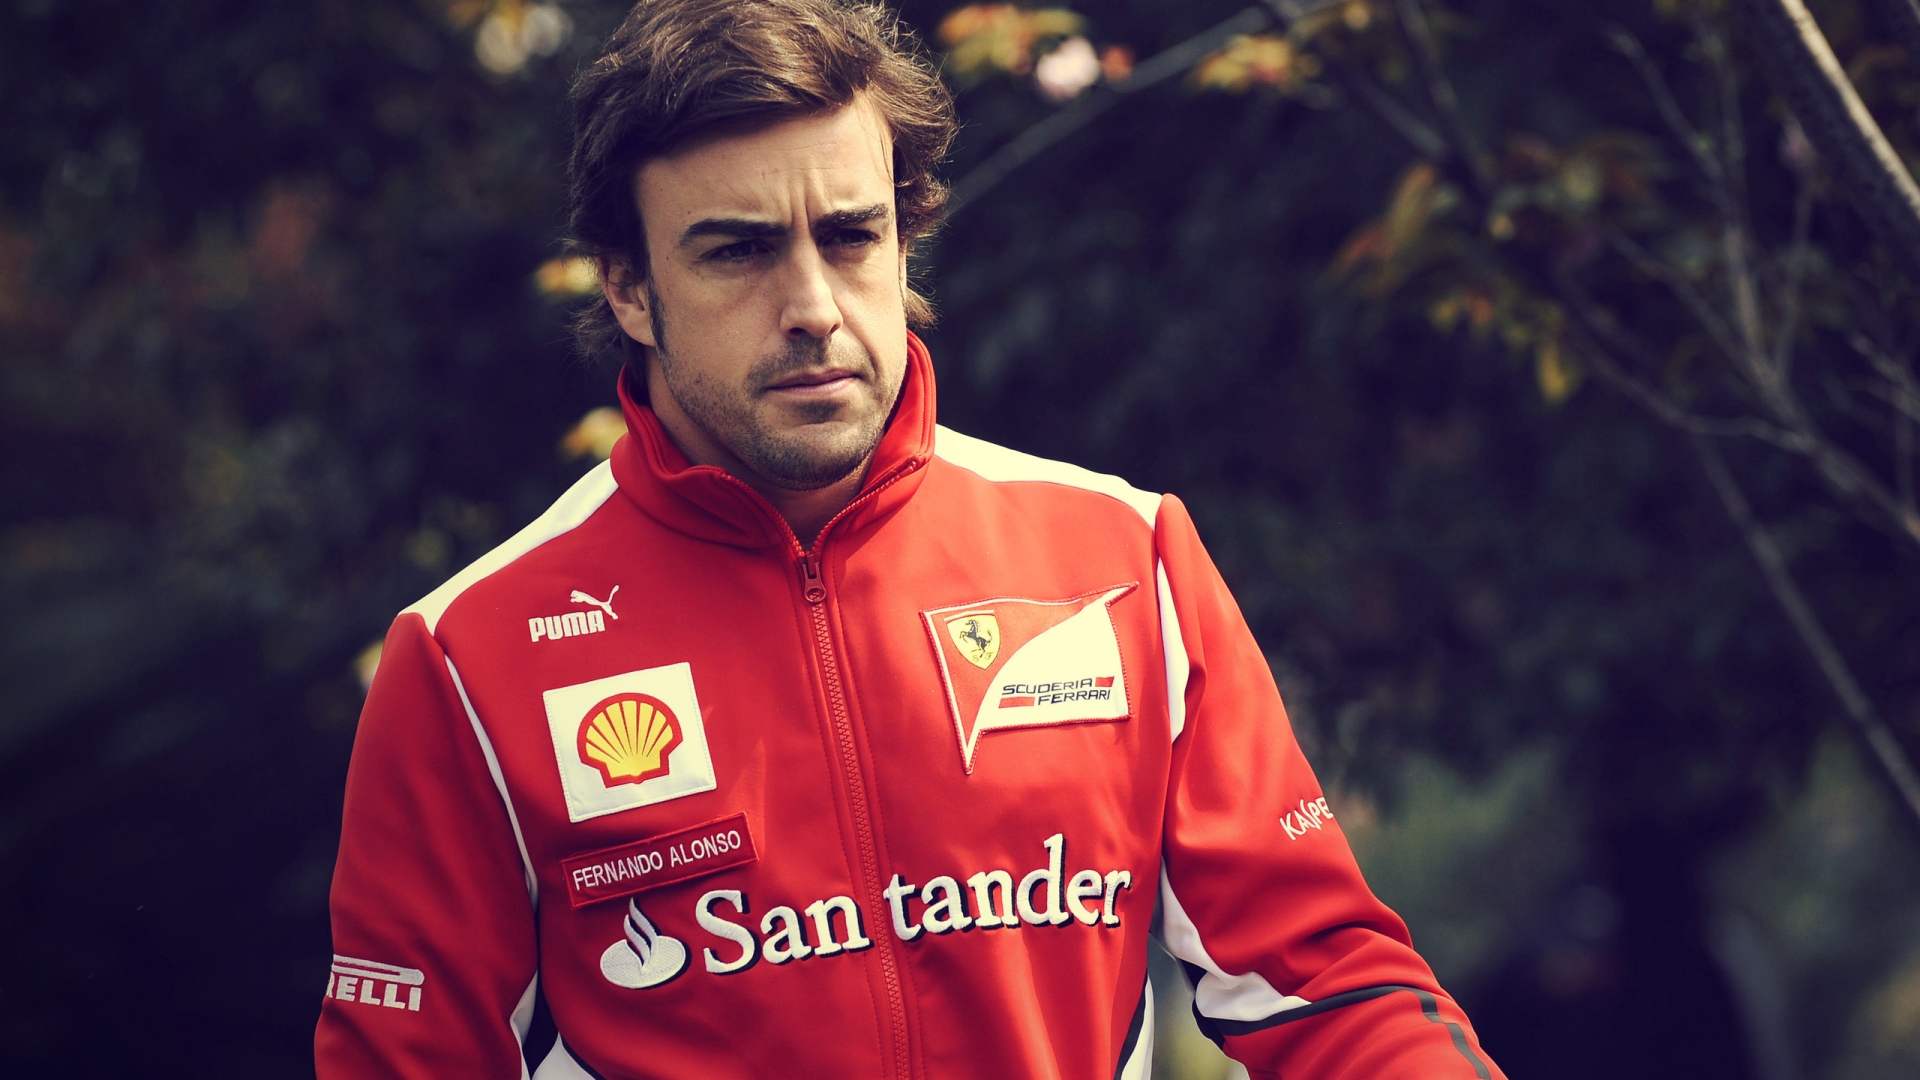 Fernando Alonso Look for 1920 x 1080 HDTV 1080p resolution